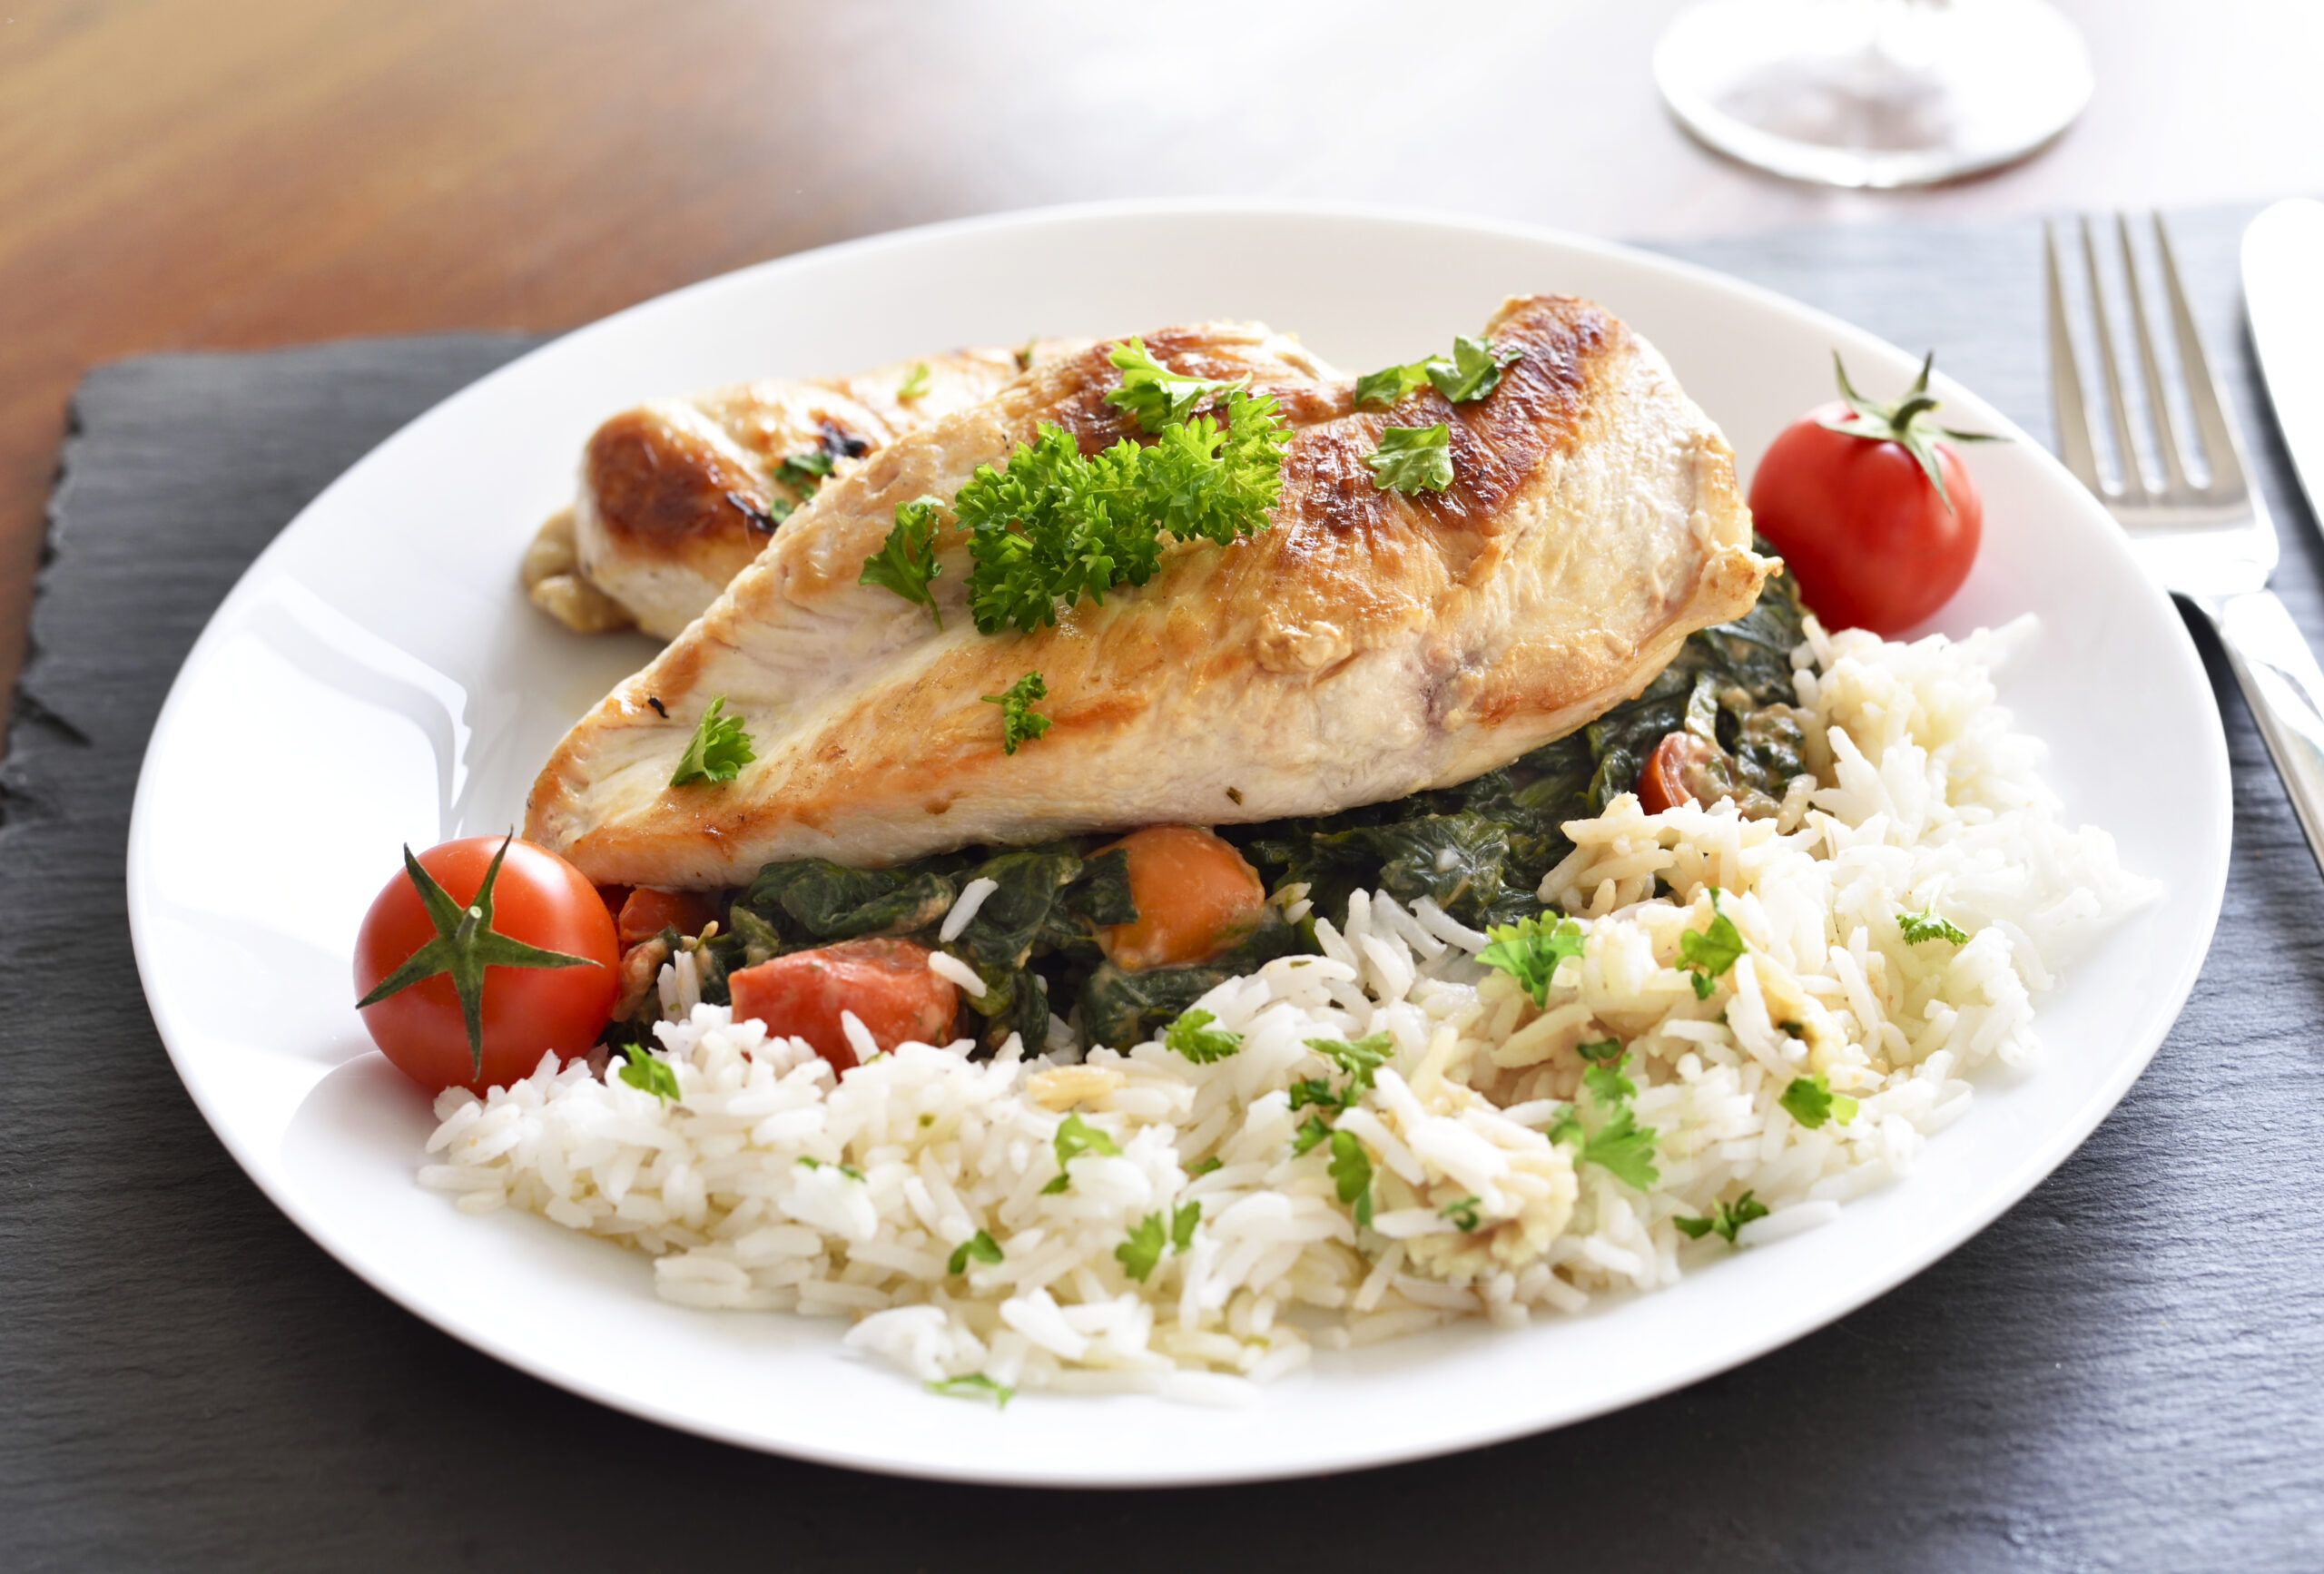 Grilled chicken breast with vegetables, rice and cherry tomatoes. Healthy eating scene, grilled chicken on a wooden table.